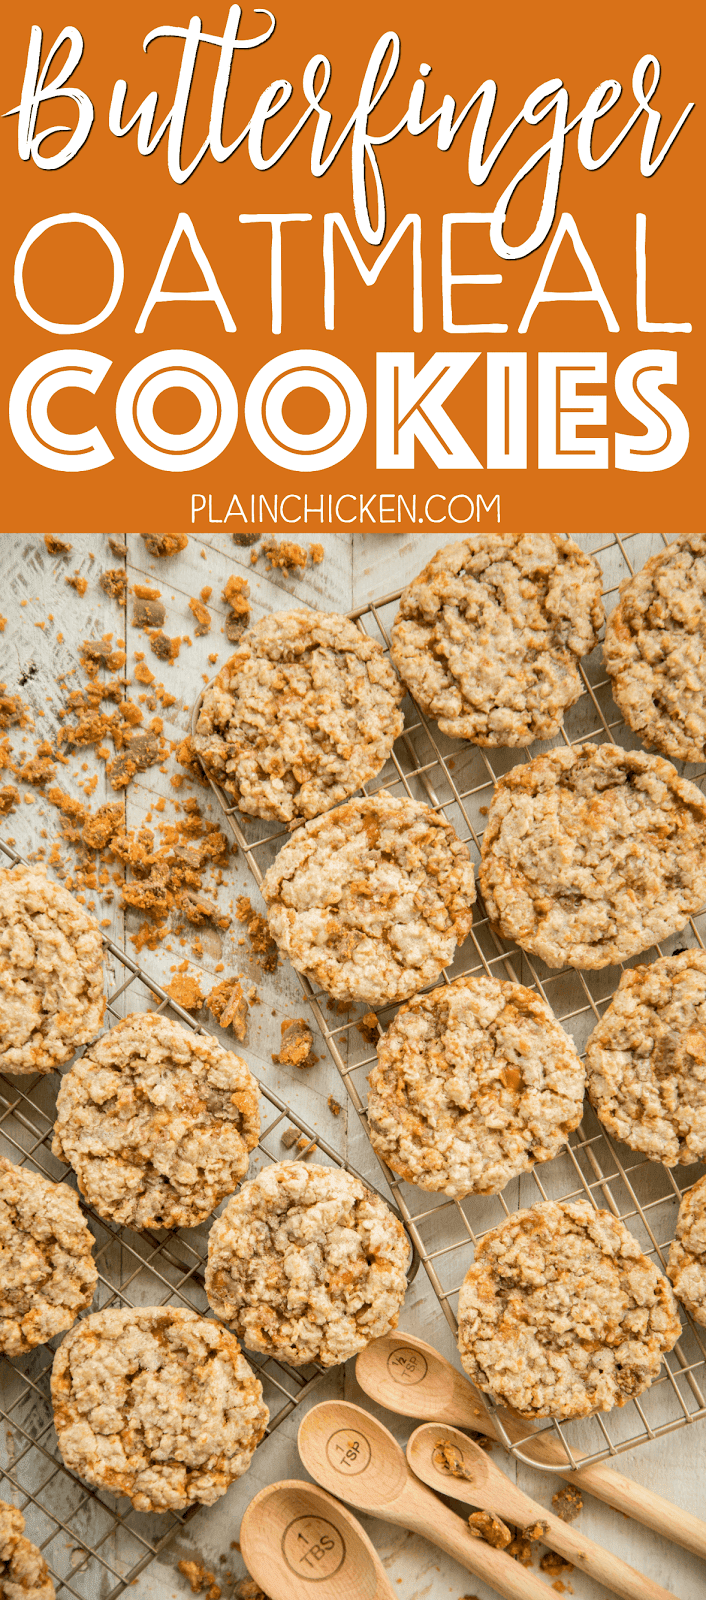 Butterfinger Oatmeal Cookies - seriously AMAZING cookies! Crispy on the outside and chewy on the inside. I had zero self-control around these cookies! ZERO!!! I ate WAY too many! Shortening, brown sugar, sugar, egg, water, vanilla, flour, salt, baking soda, quick-cook oats and Butterfinger baking bits. TO-DIE-FOR!! Make these ASAP!